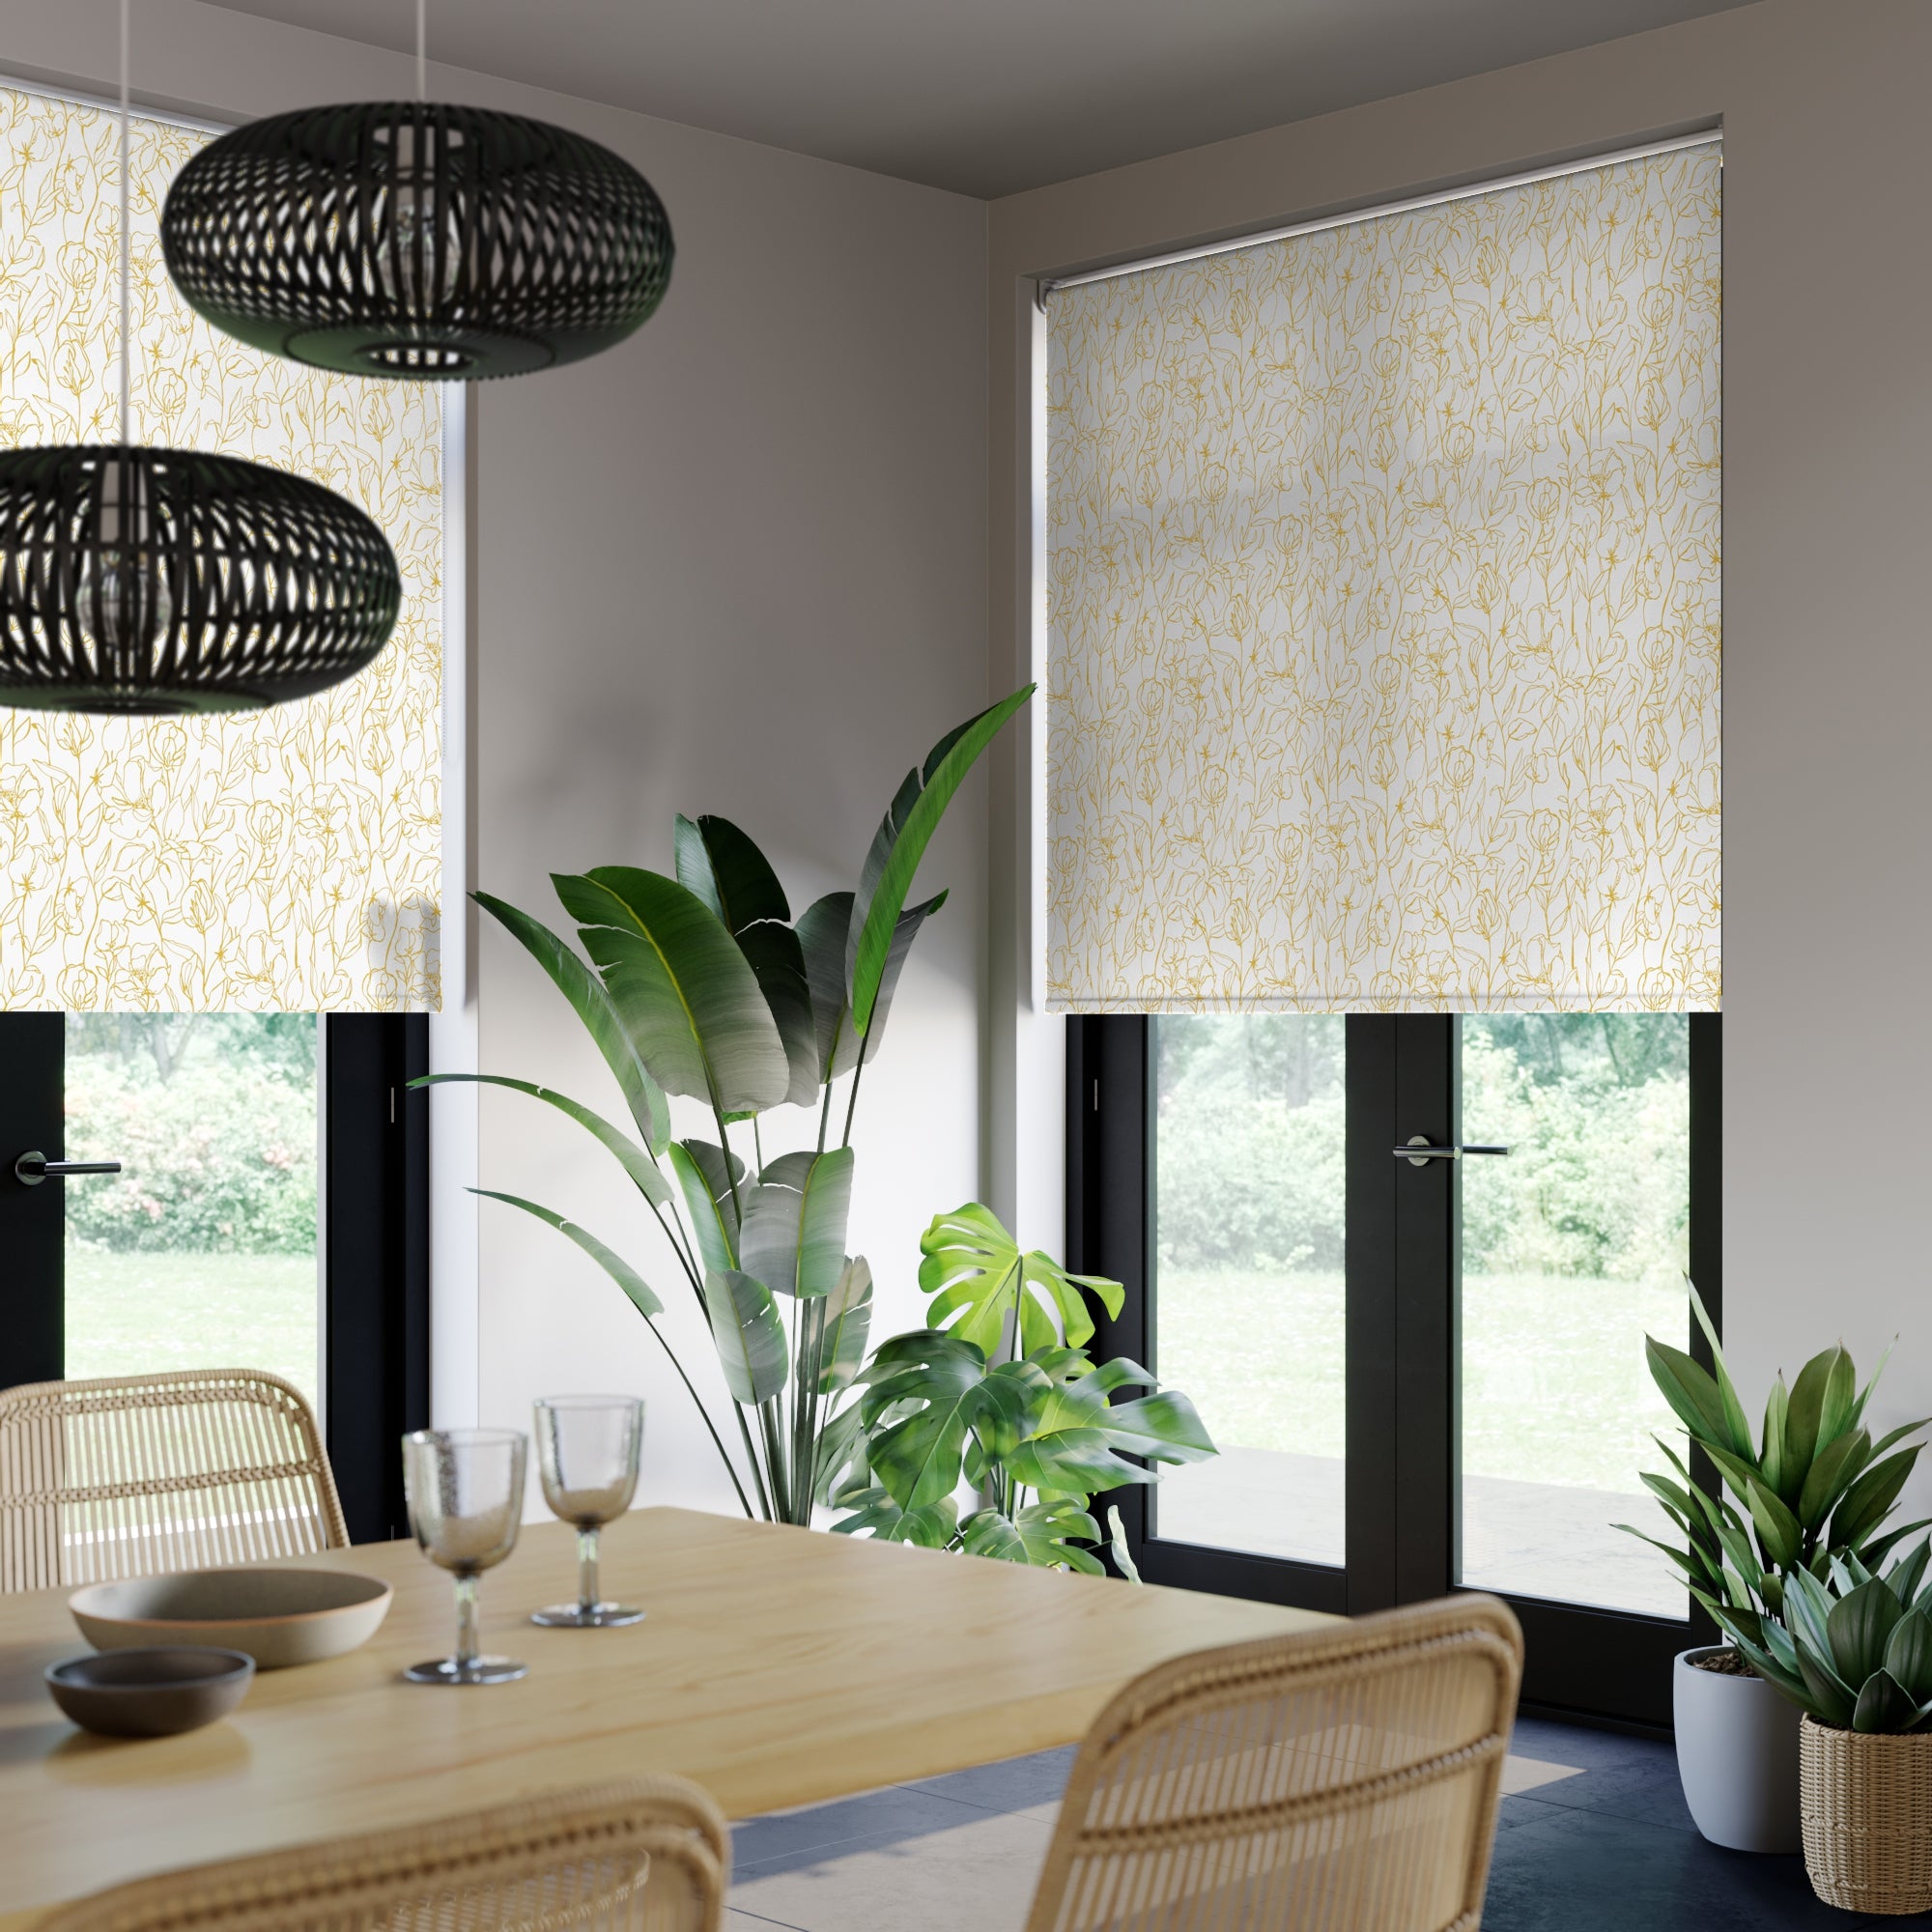 Sweet Pea Flame Retardant Daylight Made to Measure Roller Blind Sweet Pea Ochre